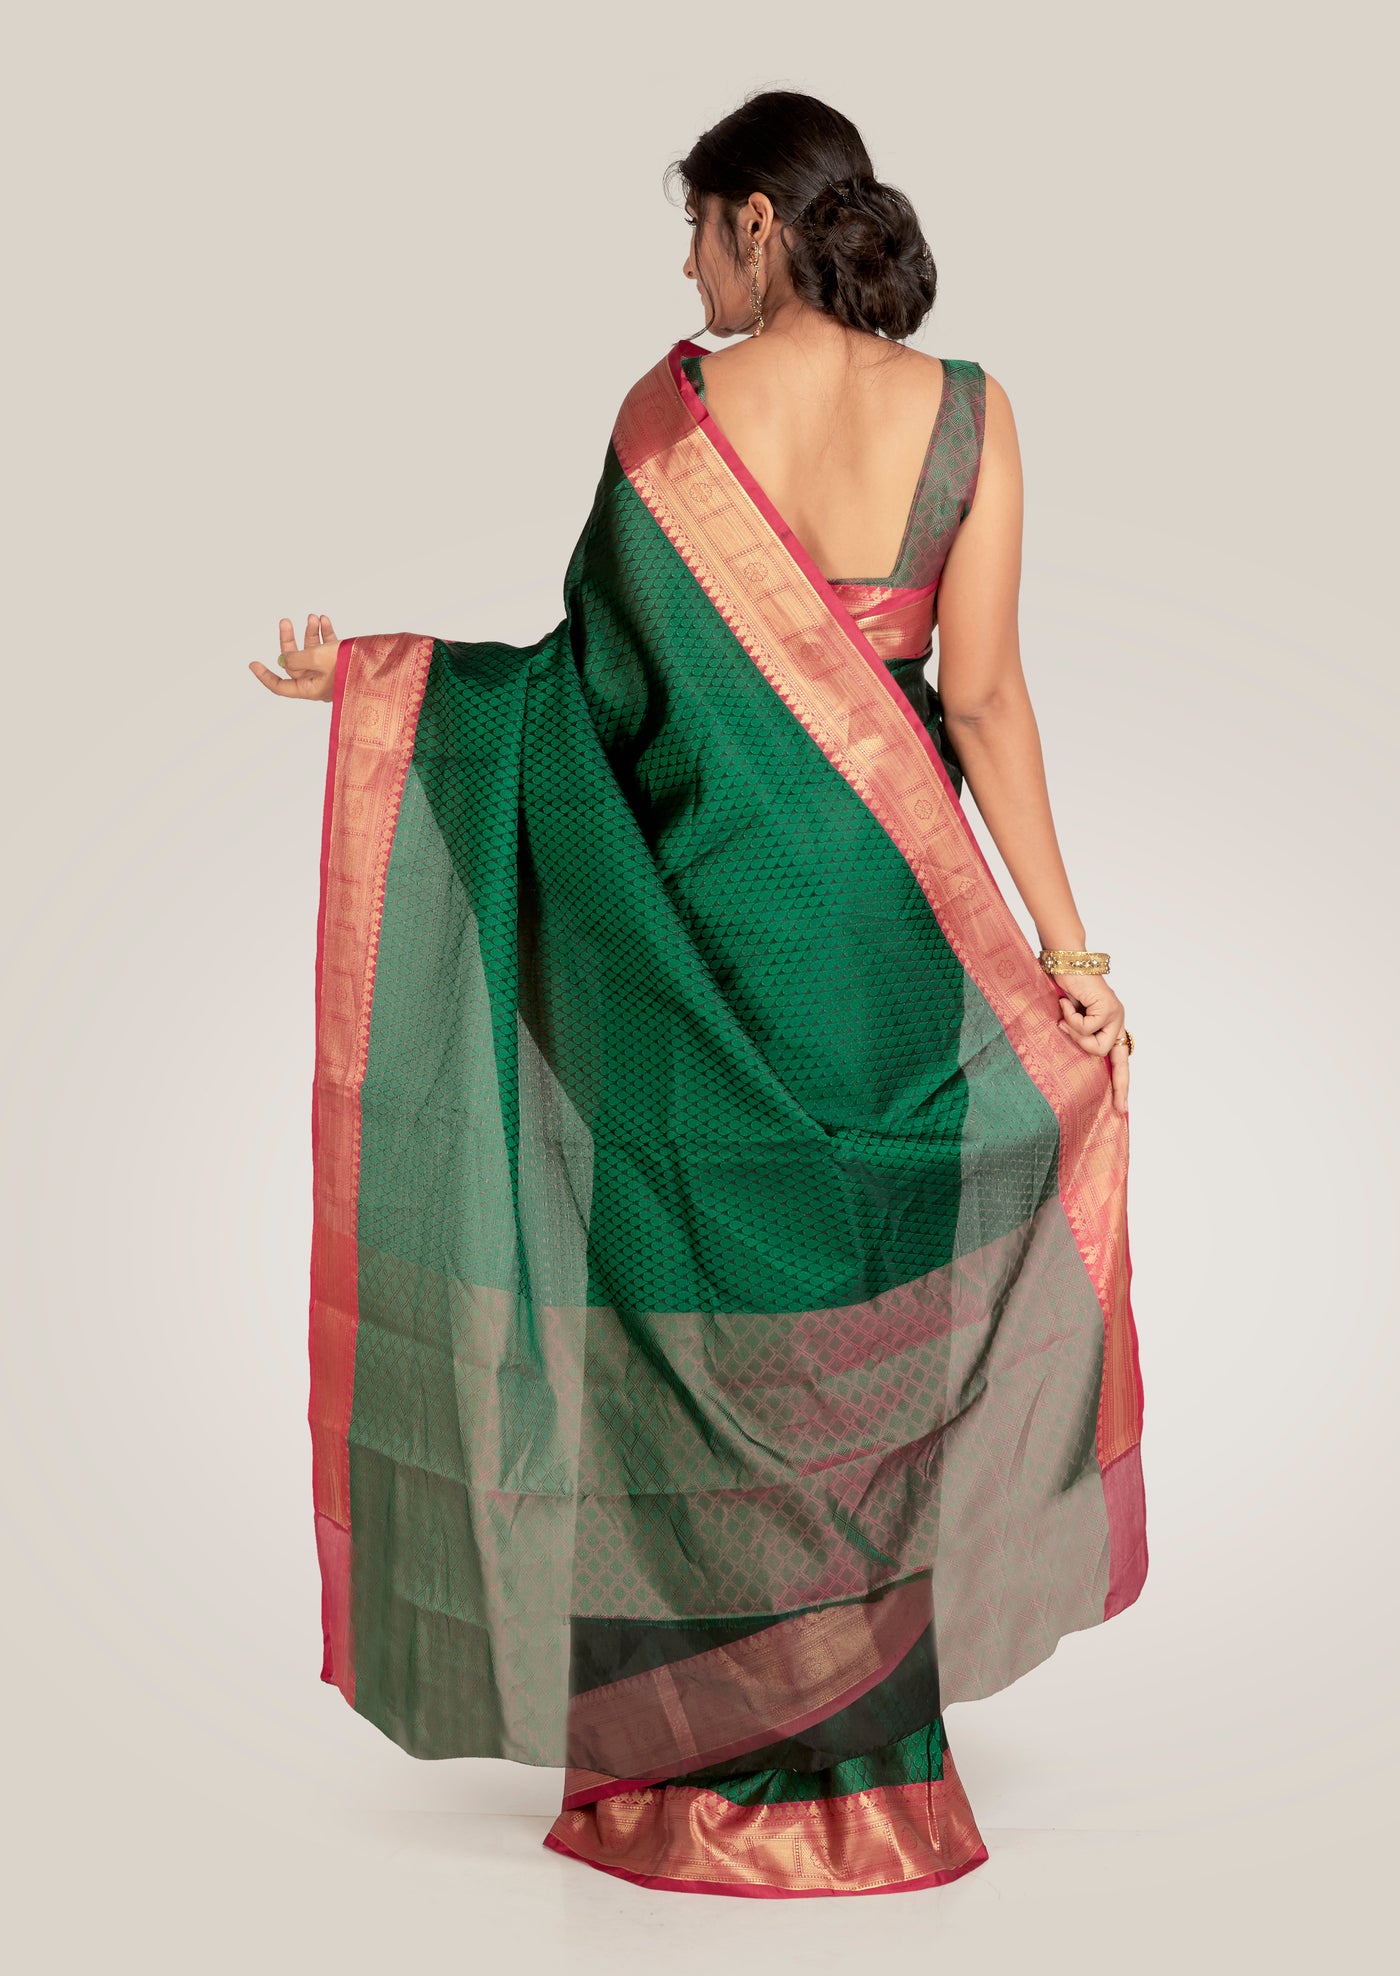 Forrest Green Silk Saree Indian Clothing in Denver, CO, Aurora, CO, Boulder, CO, Fort Collins, CO, Colorado Springs, CO, Parker, CO, Highlands Ranch, CO, Cherry Creek, CO, Centennial, CO, and Longmont, CO. NATIONWIDE SHIPPING USA- India Fashion X